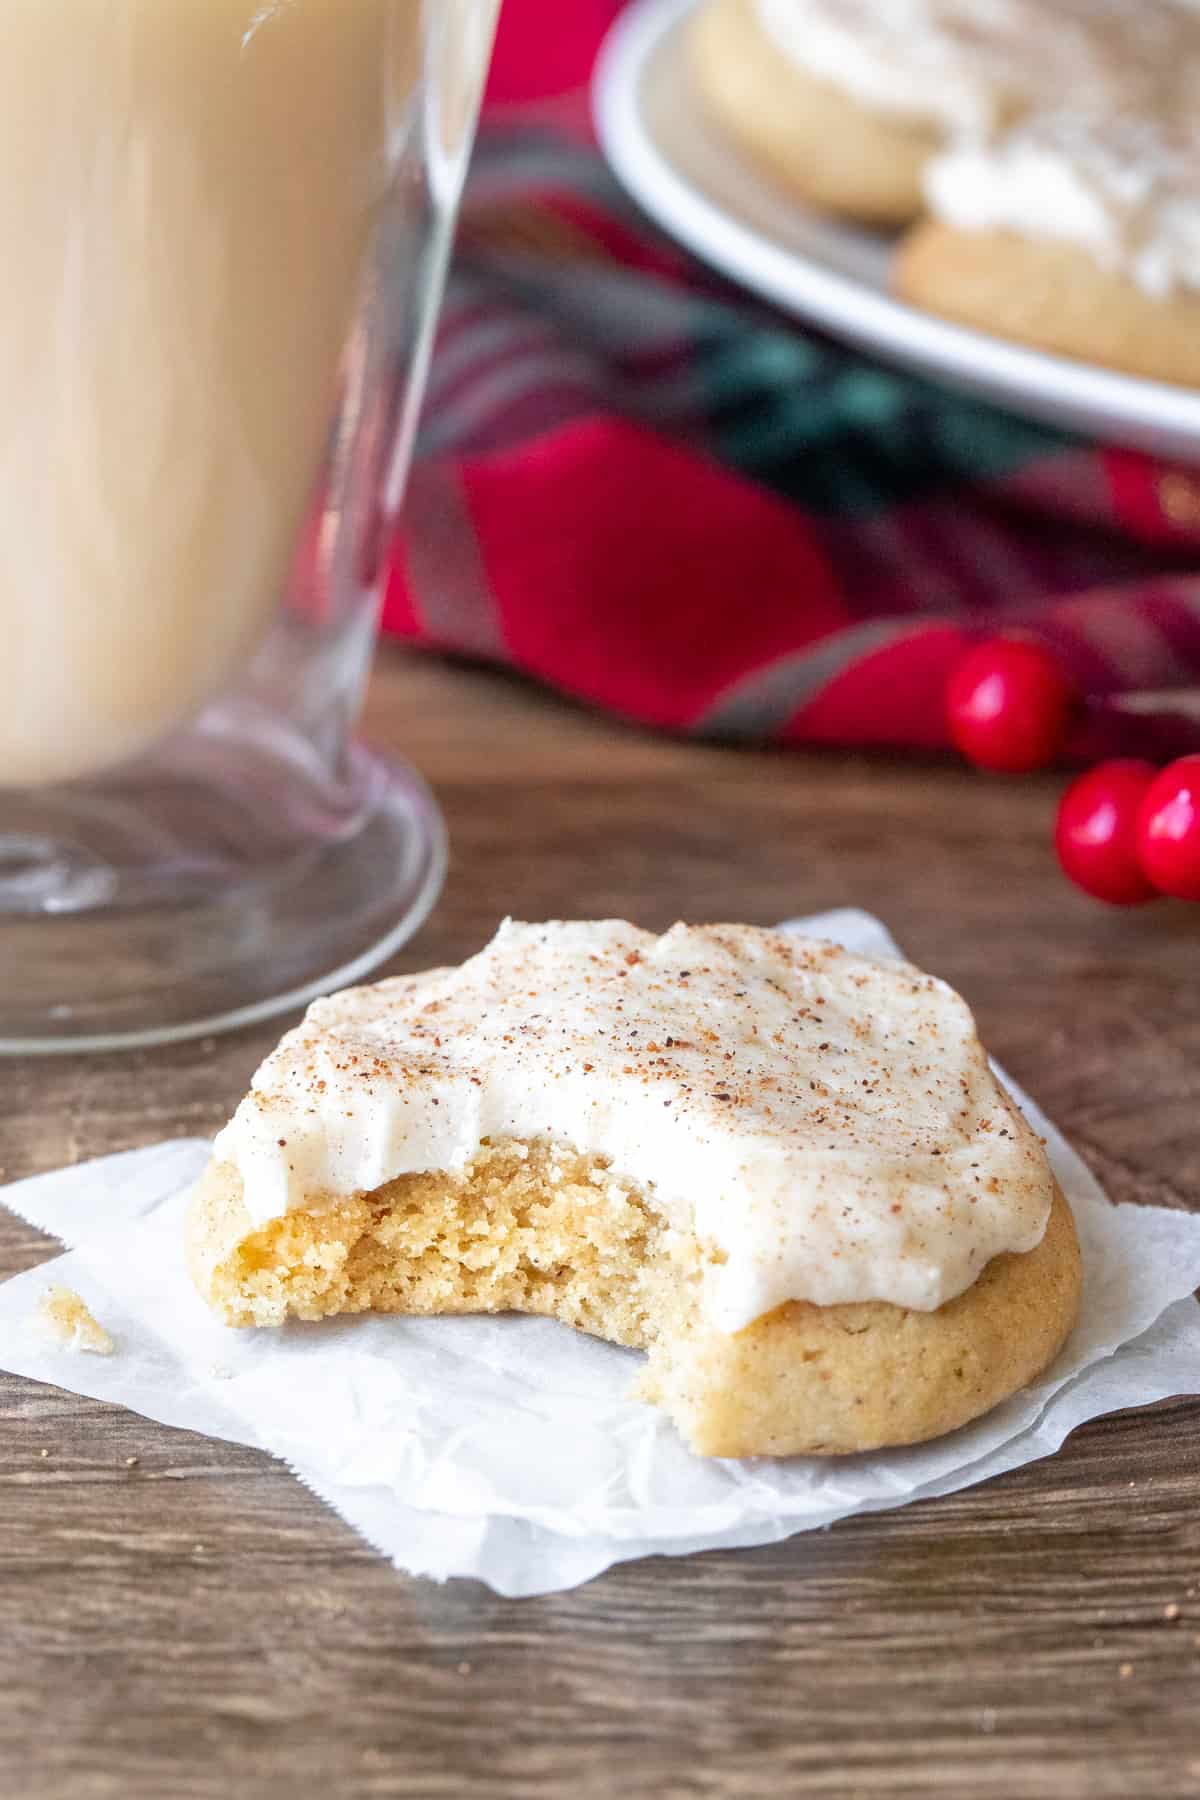 Frosted eggnog cookie with a bite taken out beside a glass of eggnog